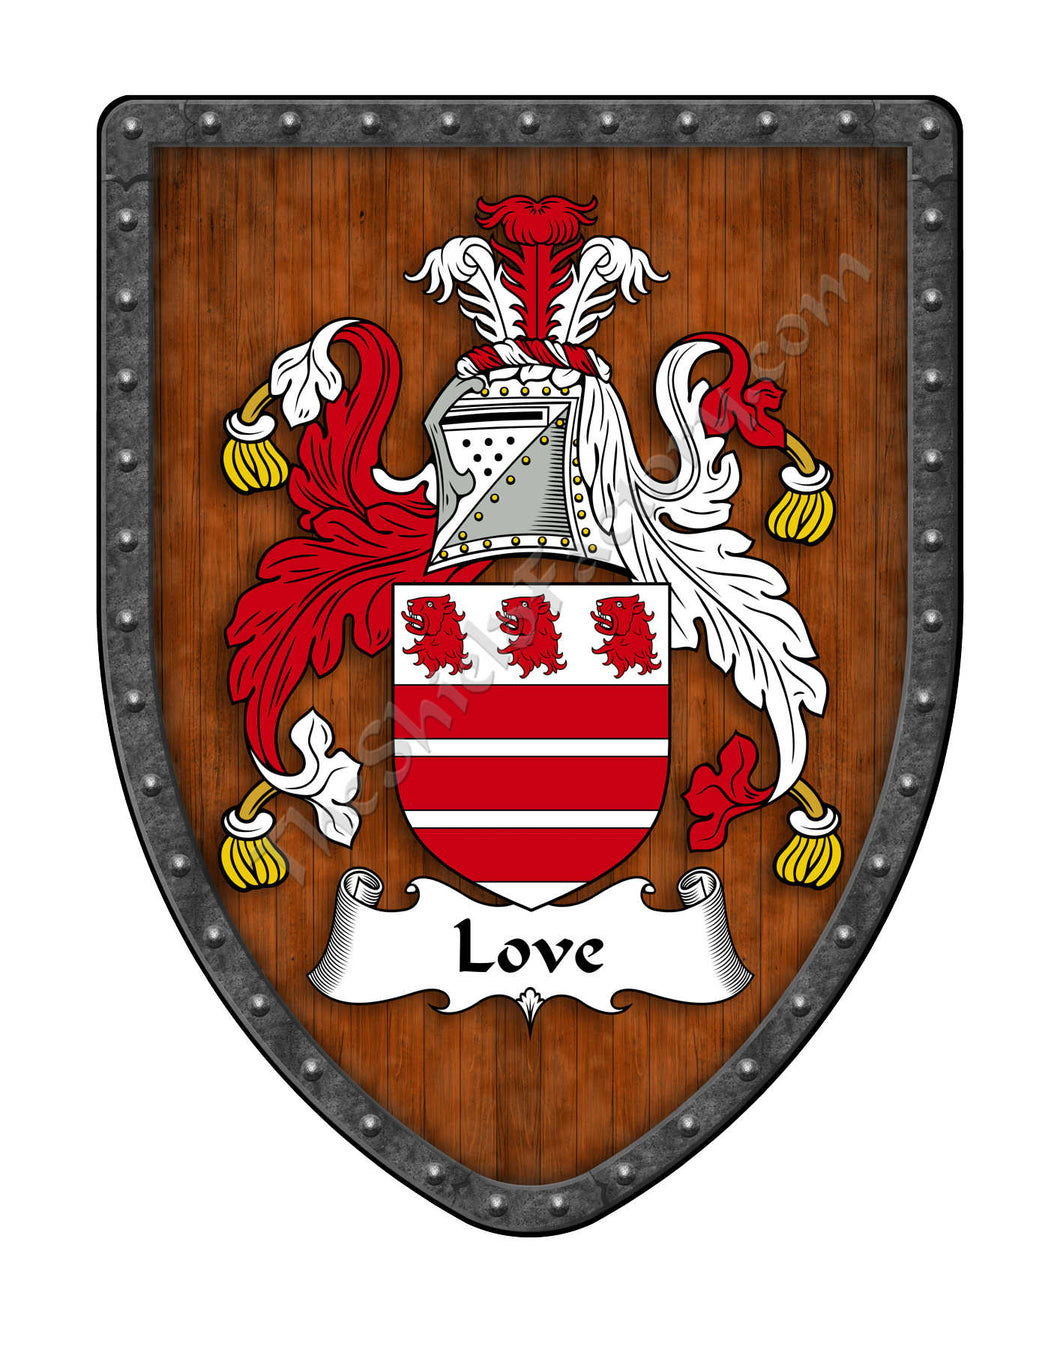 Love Coat of Arms